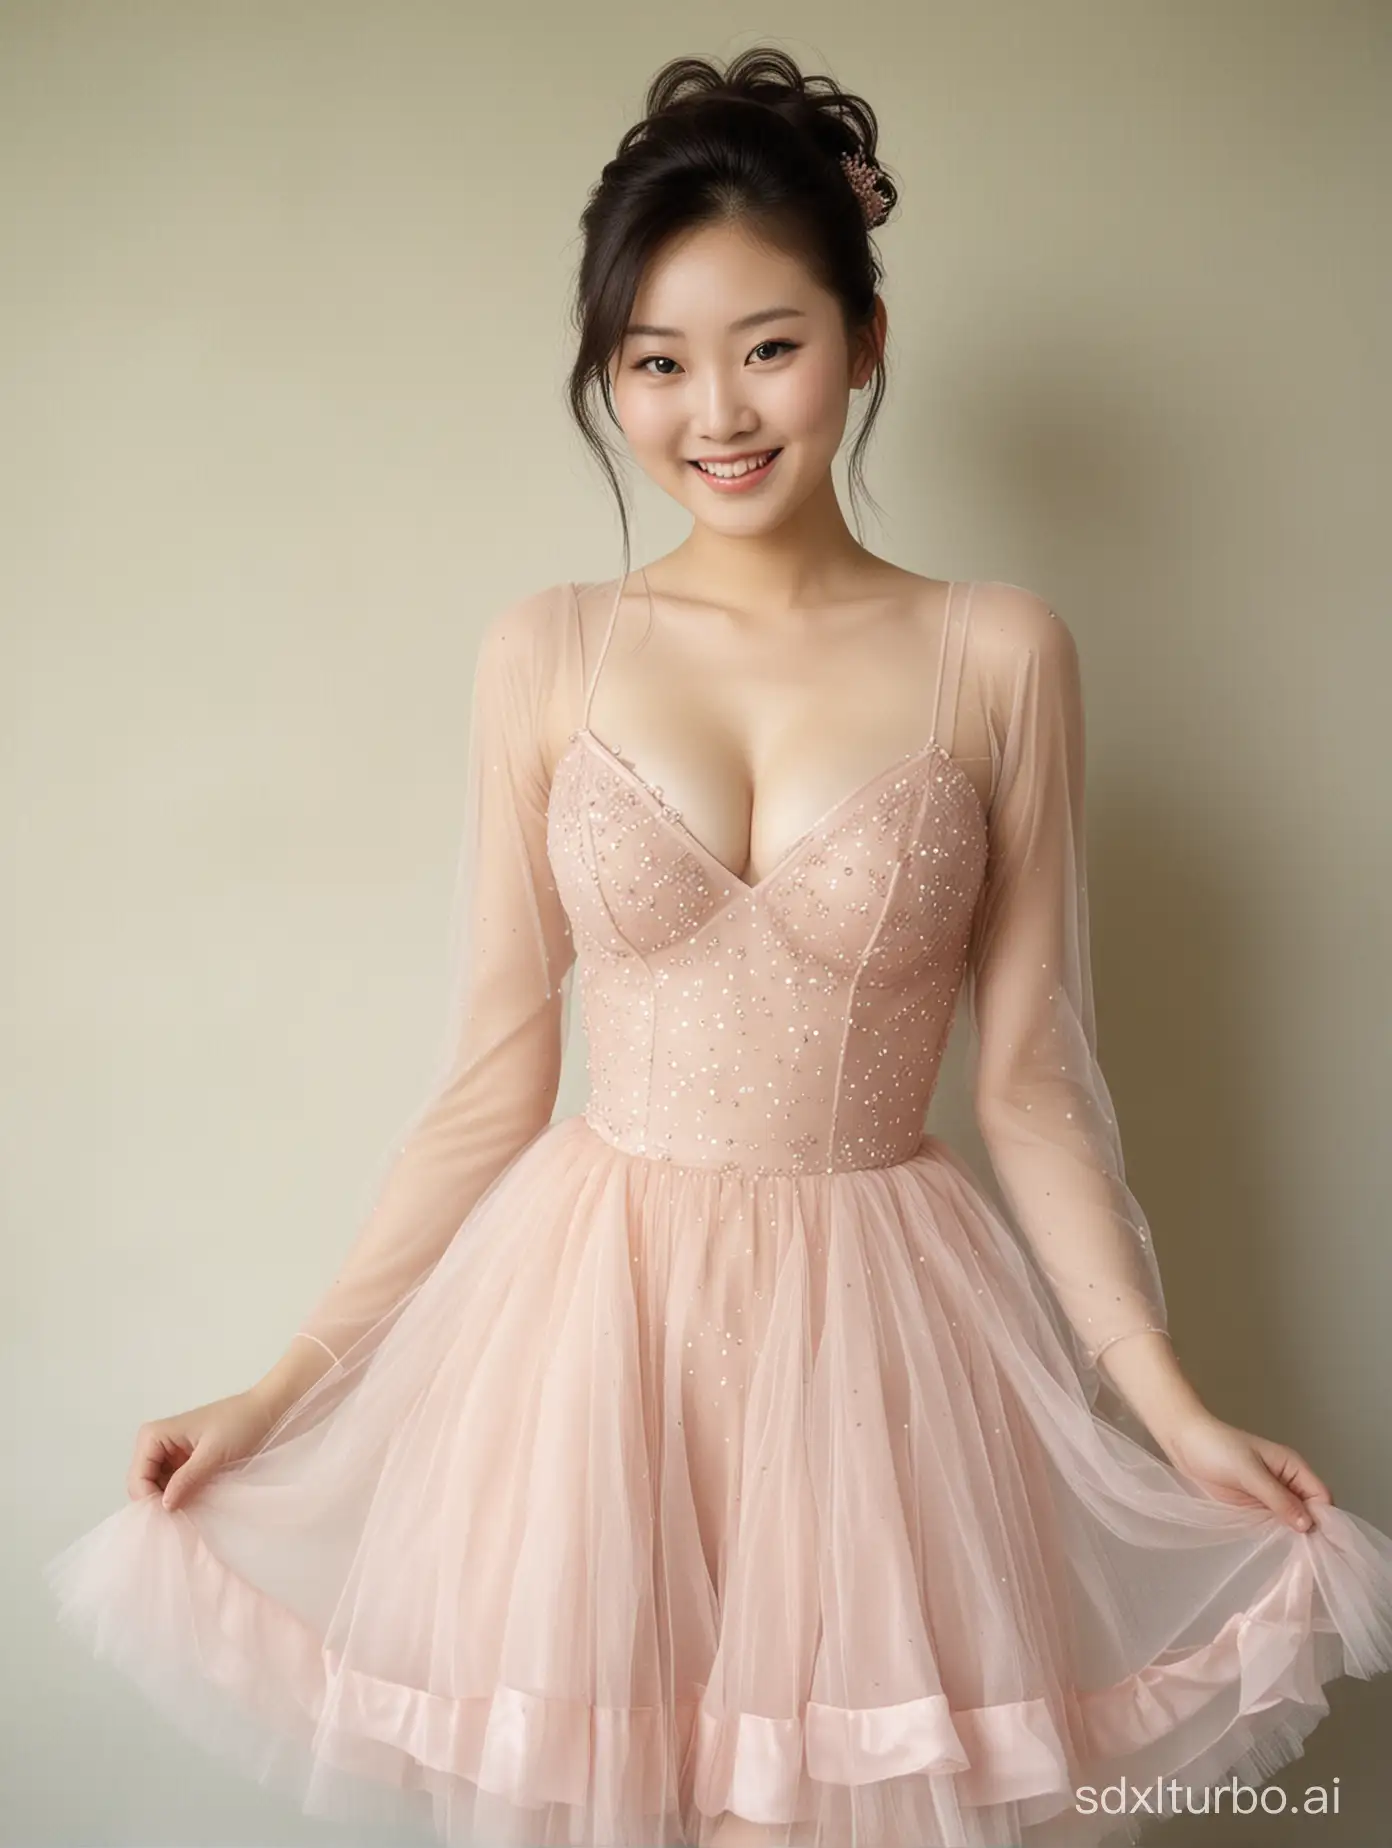 1 Chinese young woman, large breast, sexy, full body, smile, sheer tulle dress, Photograph by Loretta Lux